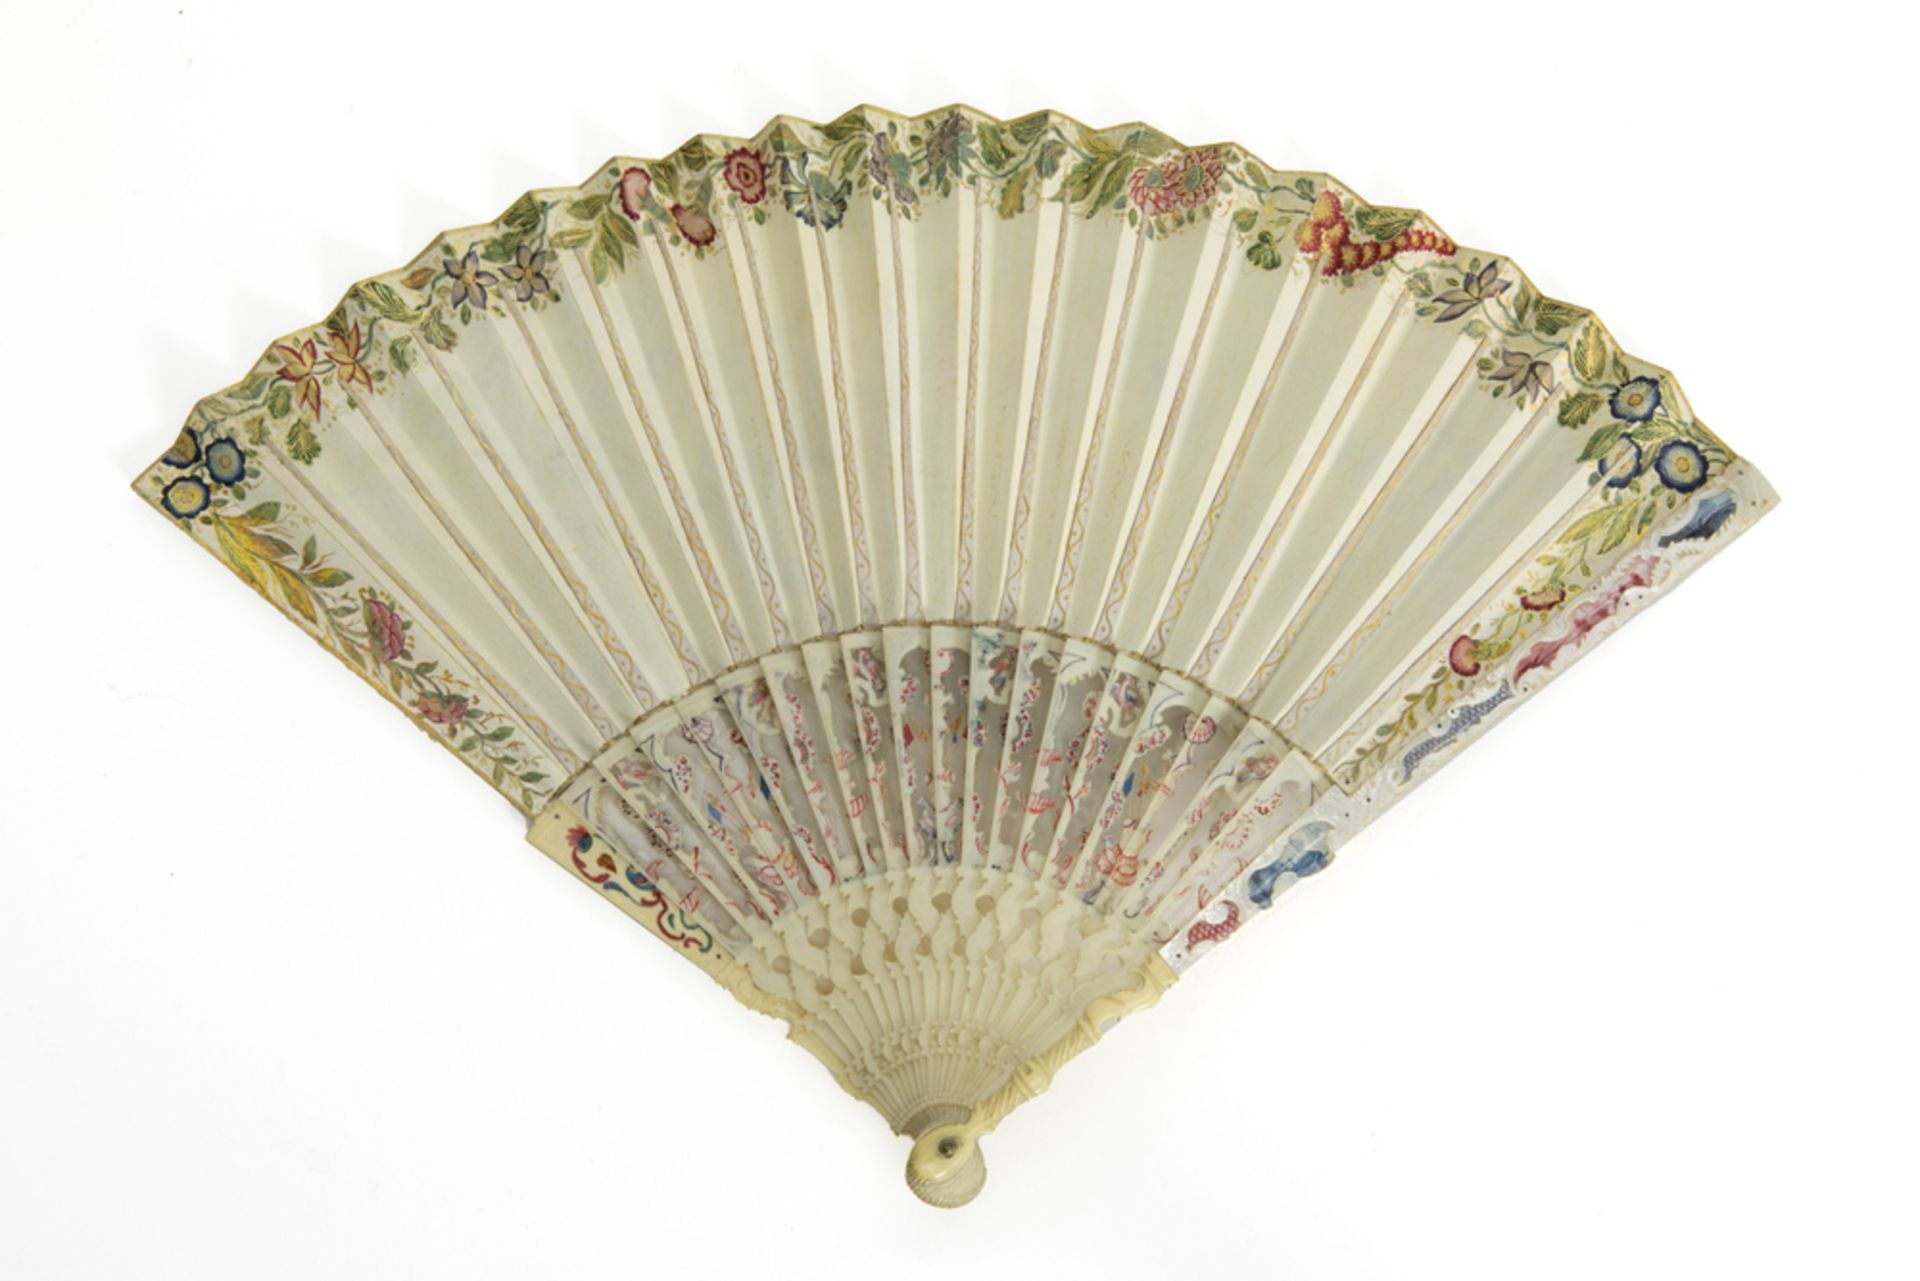 presumably 18th Cent. fan with pins in mother of pearl and bone and with a beautifully painted fan - Image 2 of 4